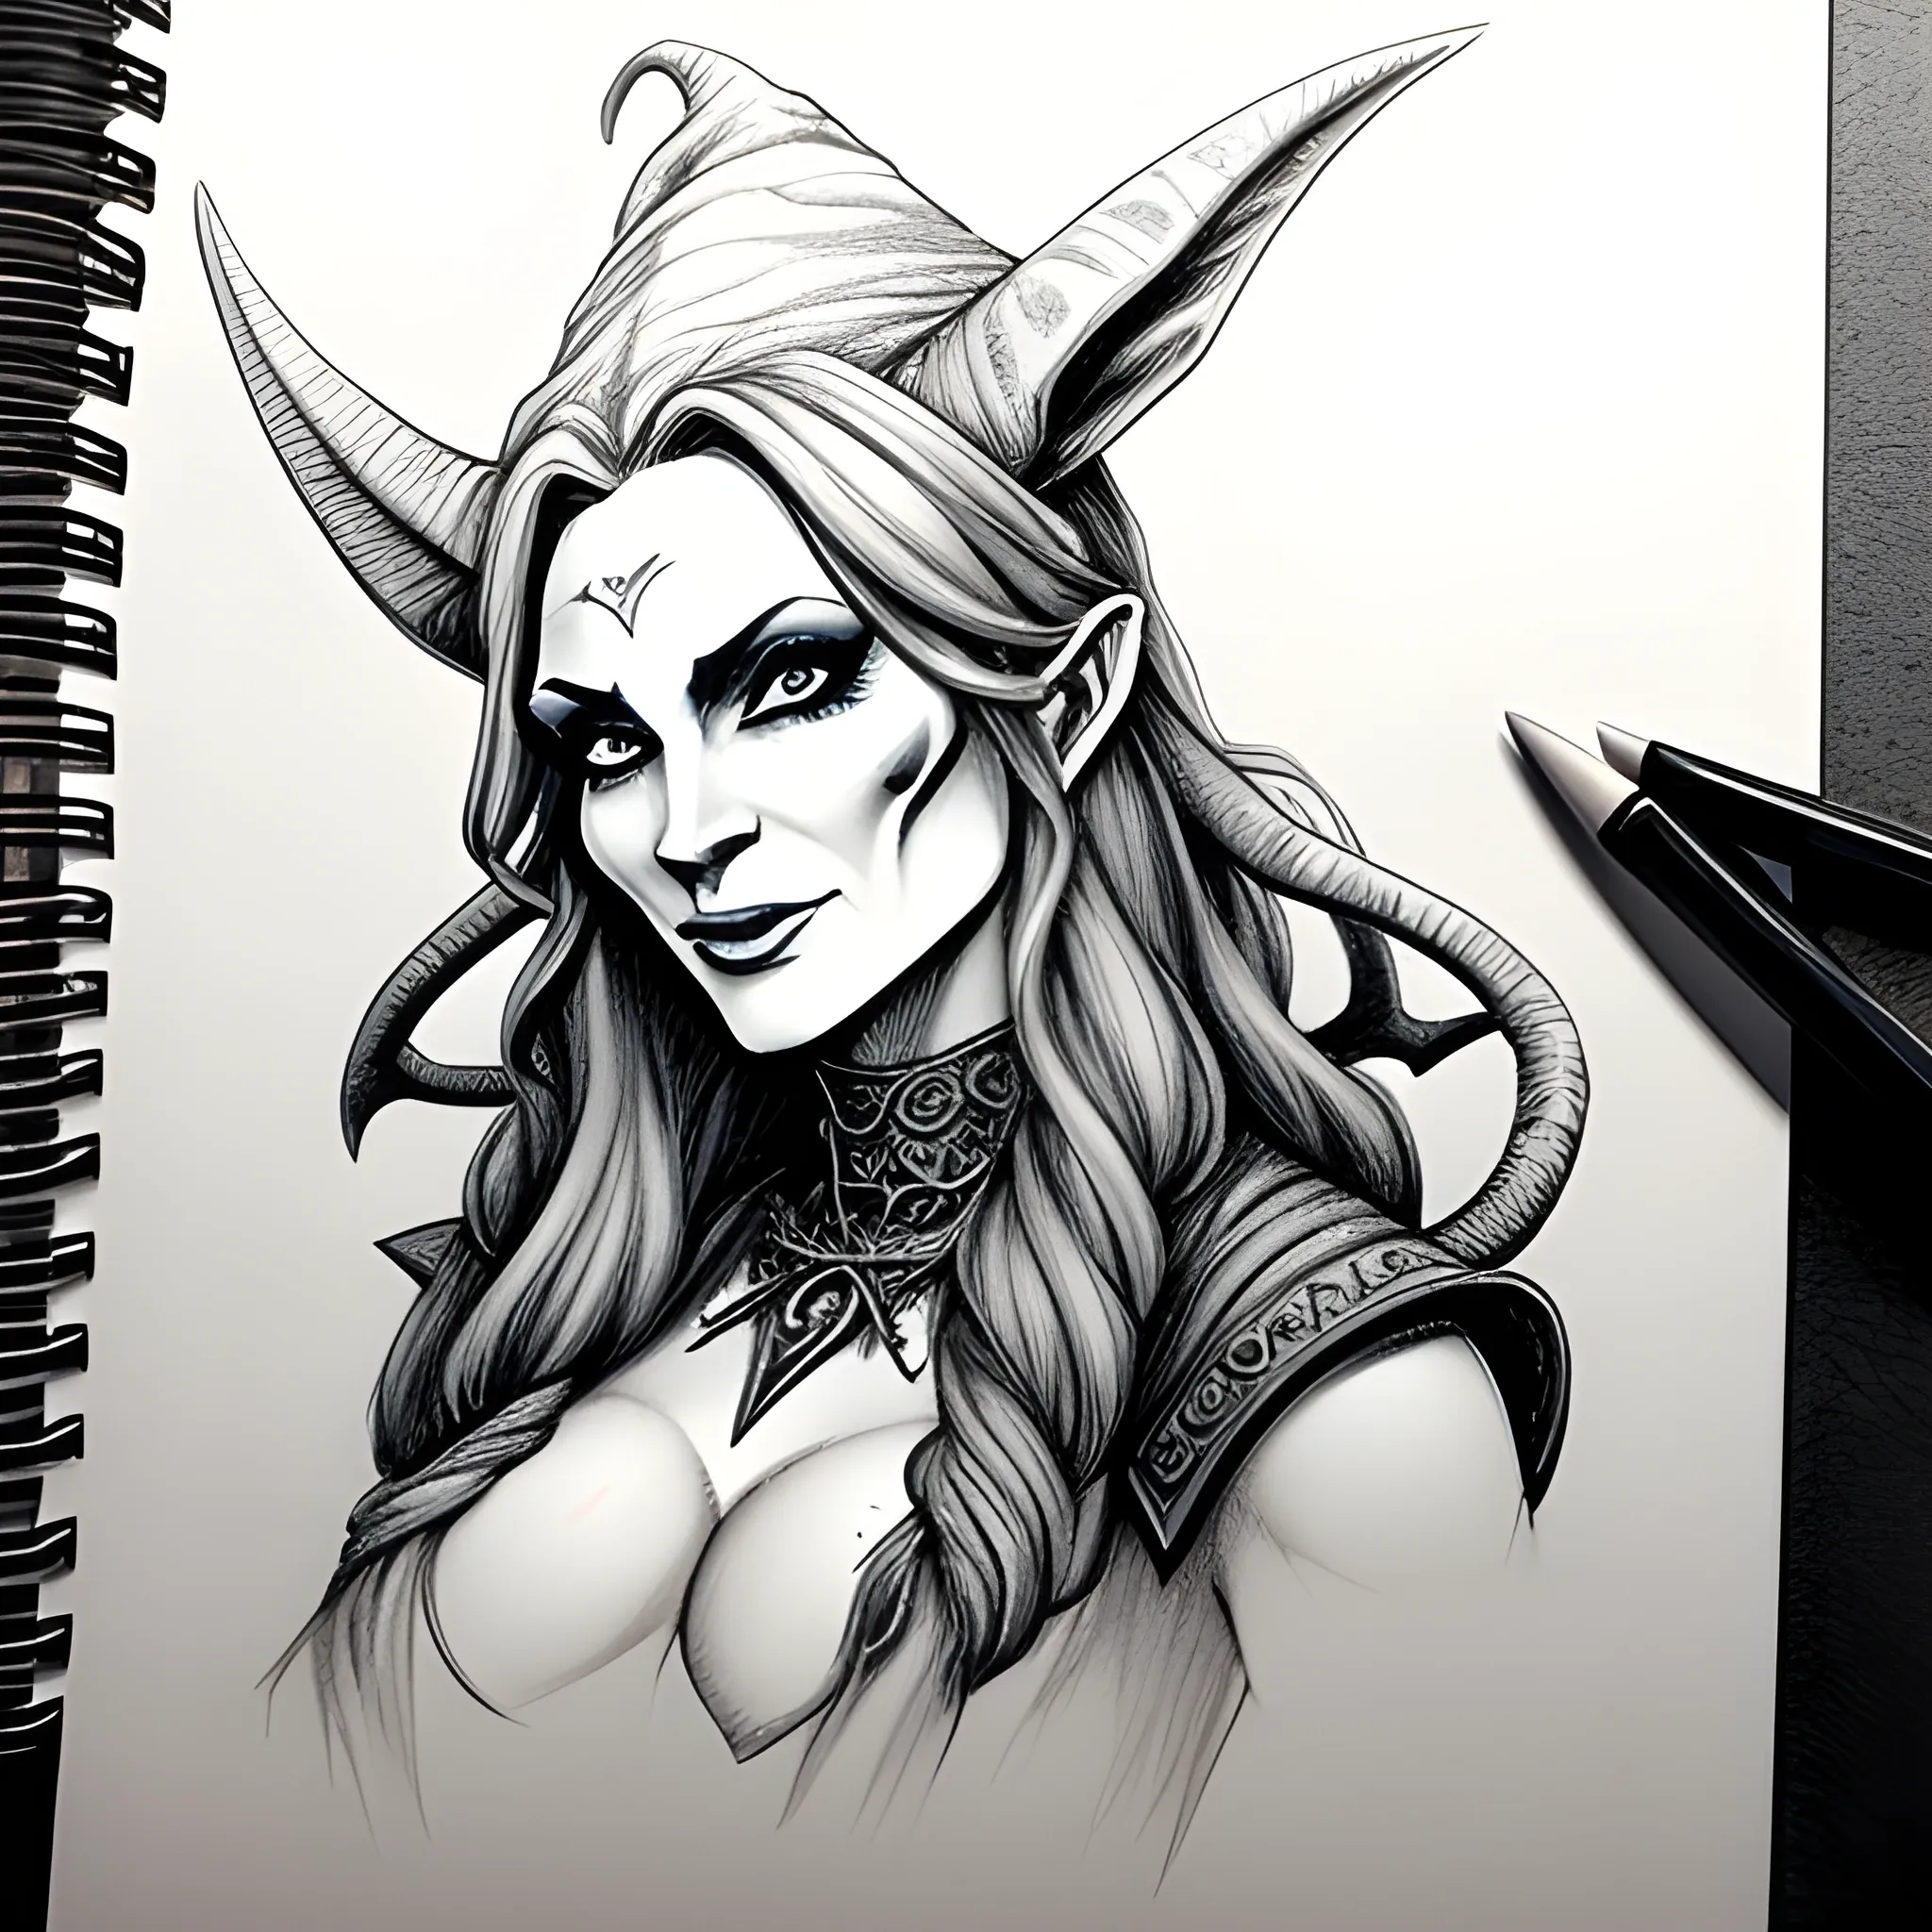 Coven of the wicked Firbolg witch young + beautiful

, Pencil Sketch